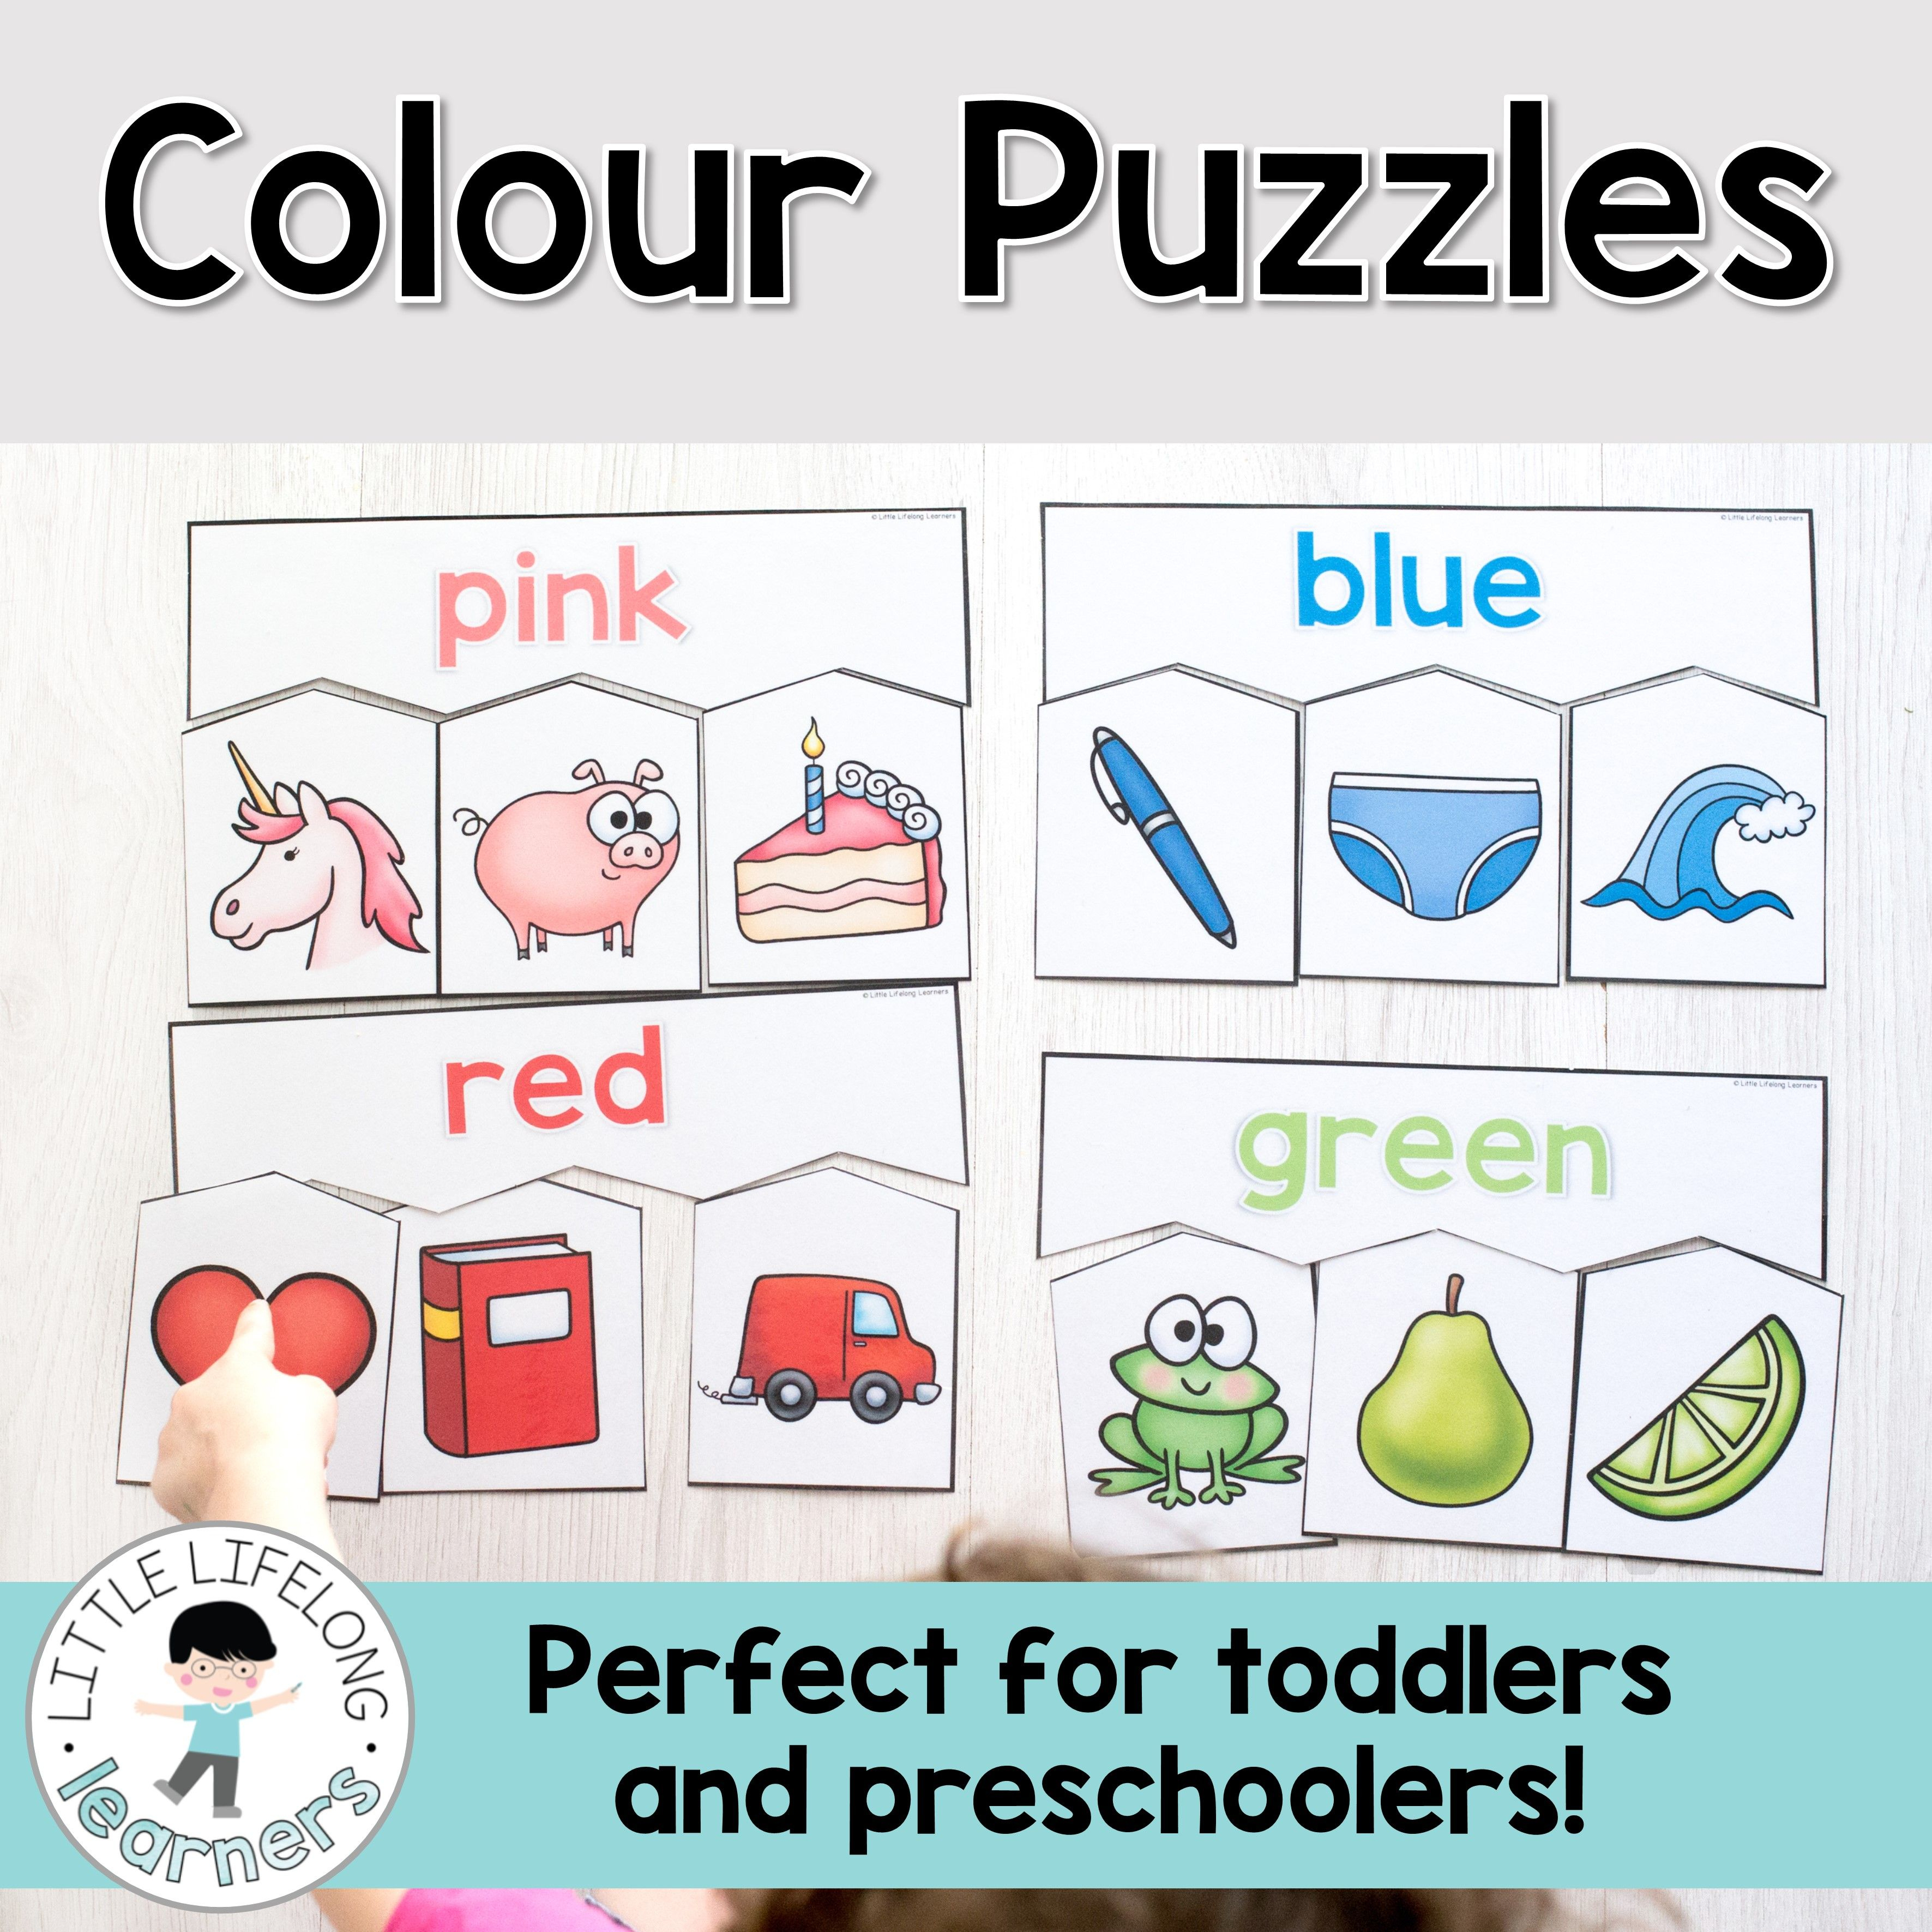 Colour Puzzles For Toddlers And Preschoolers | Toddler And - Printable Puzzles For 2 Year Olds